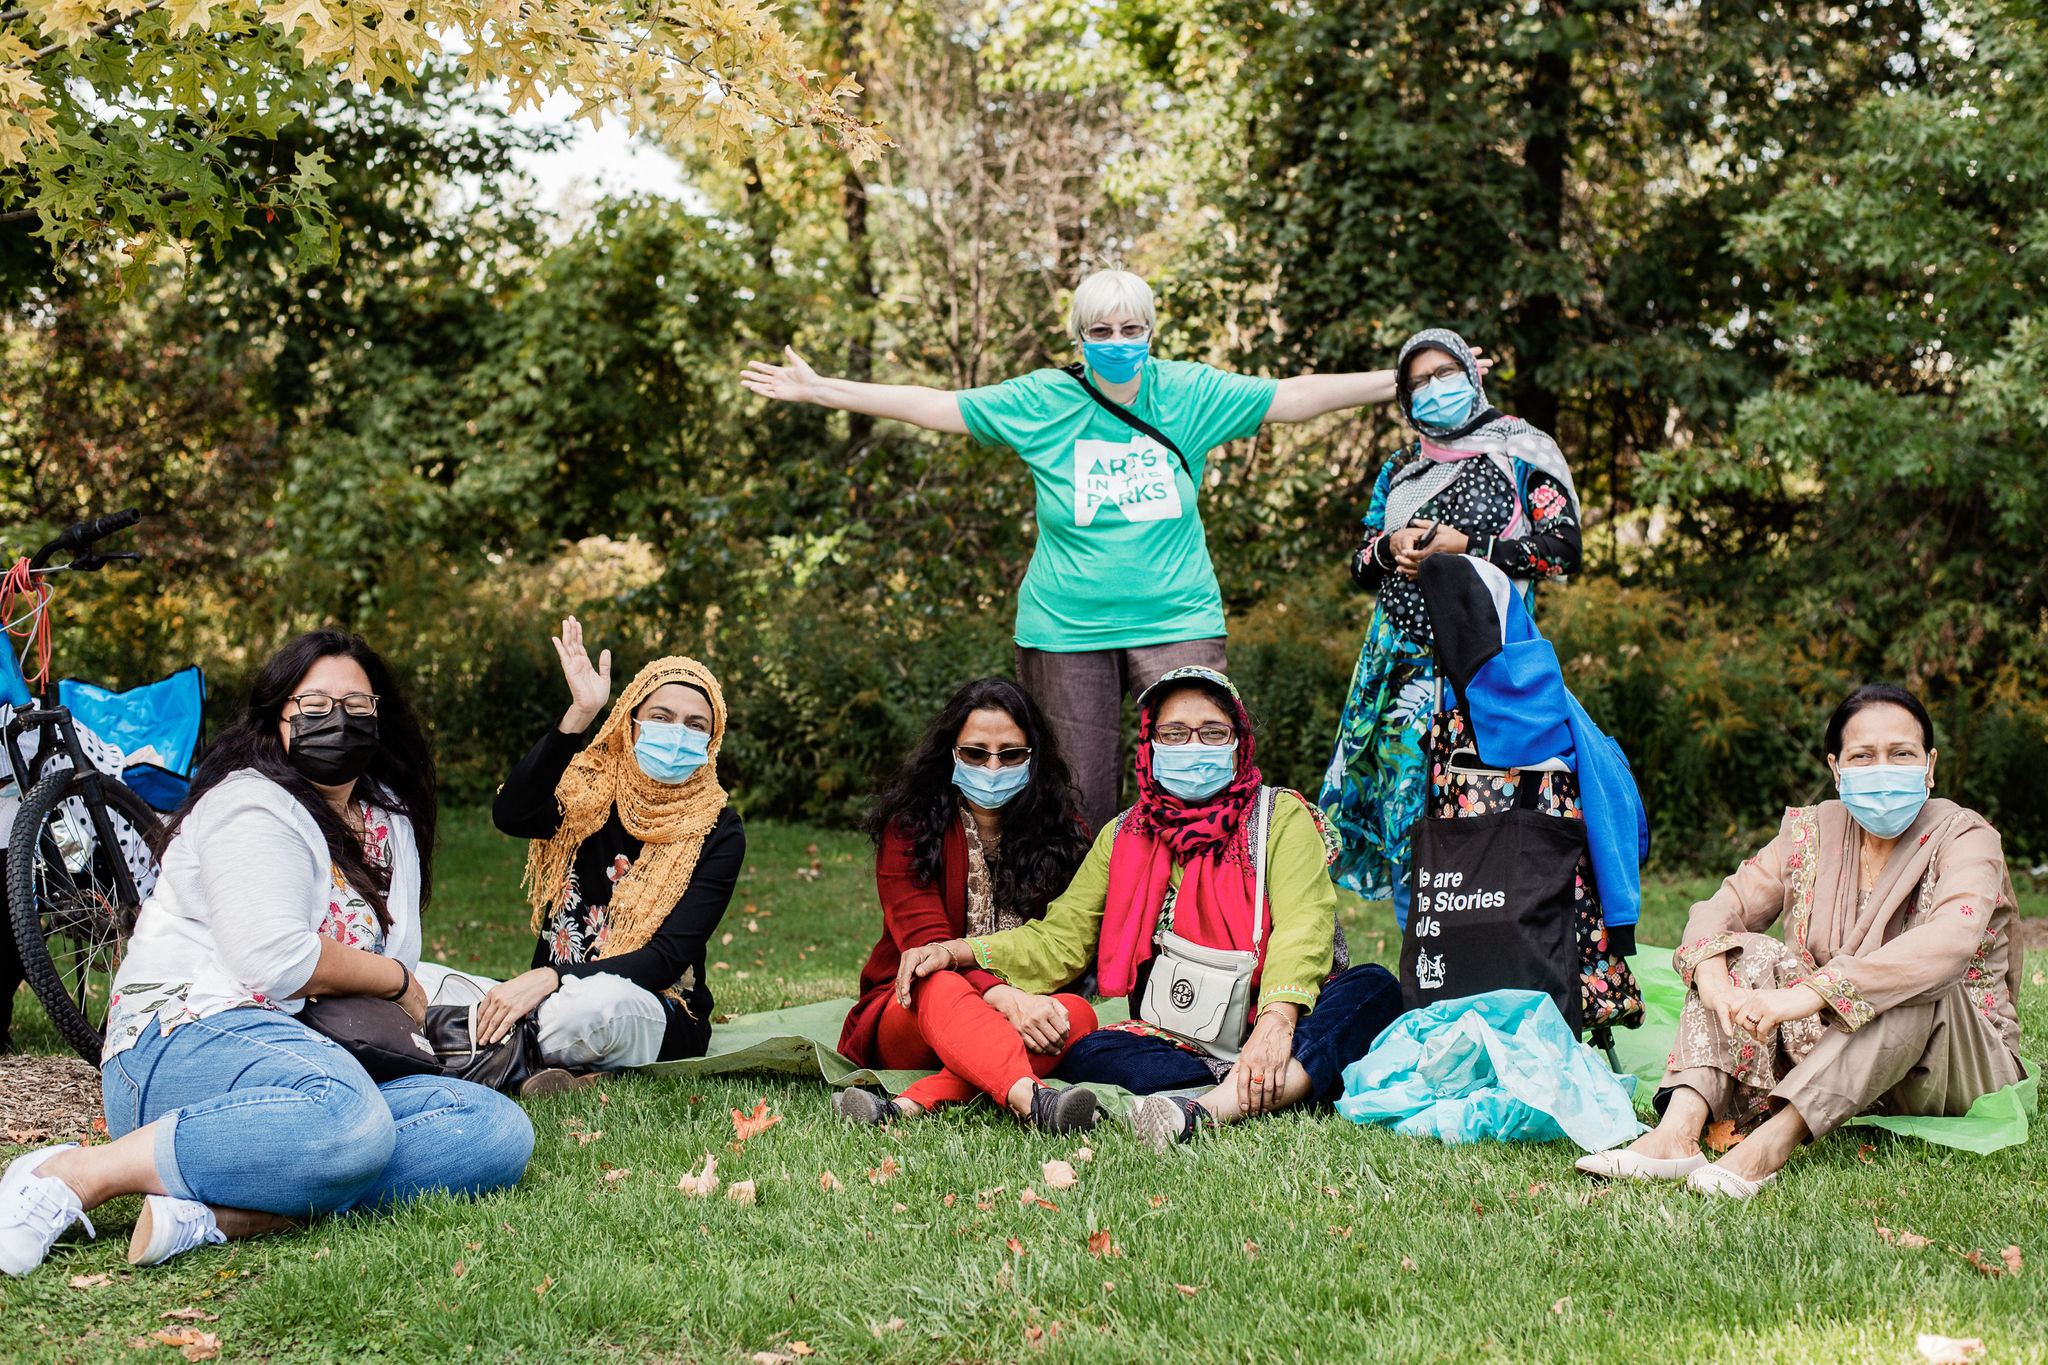 A group of women stand and sit together on the grass. They look directly at the camera, they are wearing face masks.